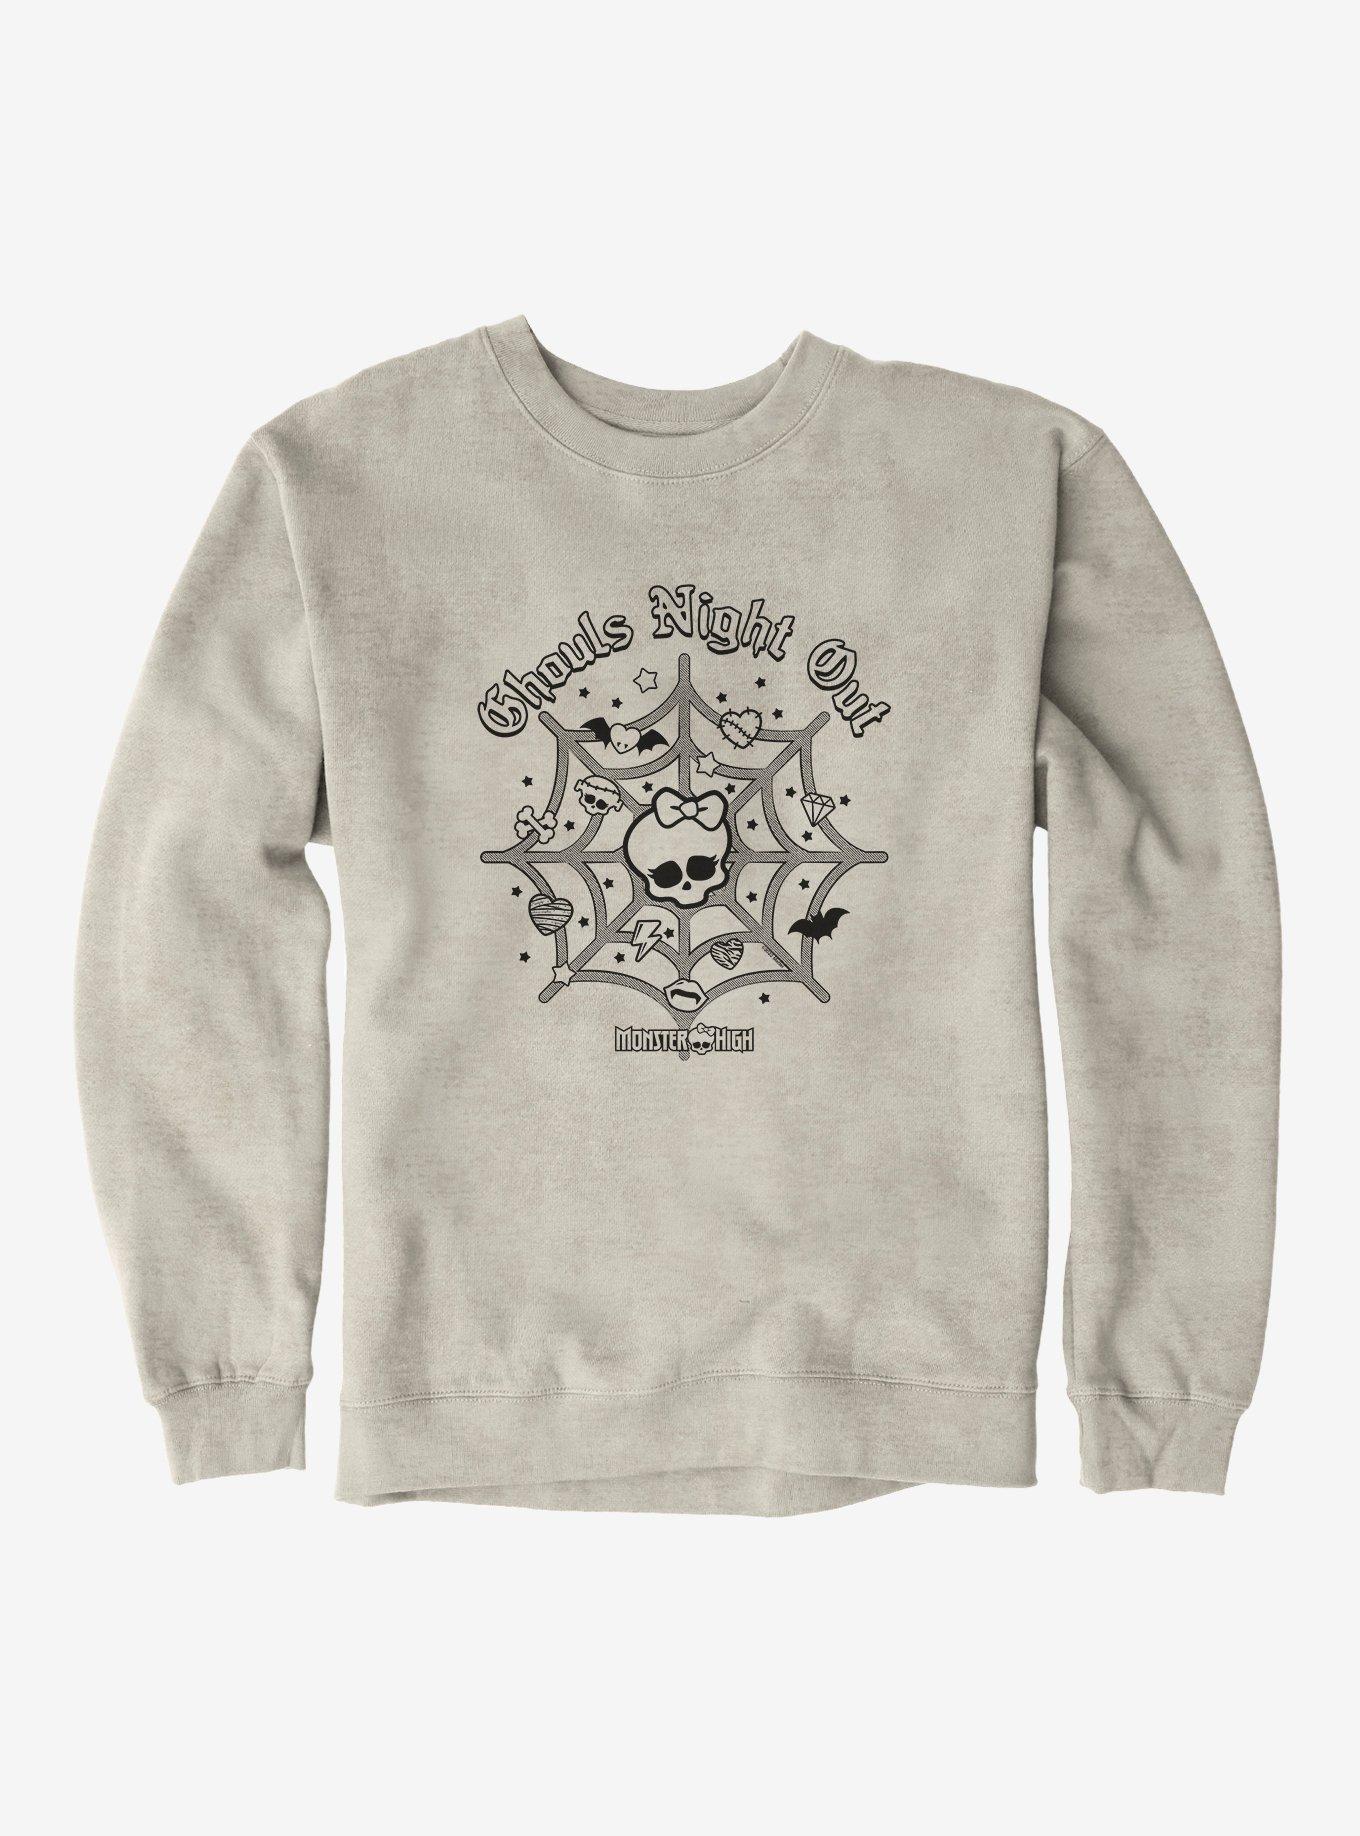 Monster High Ghouls Night Out Spiderweb Sweatshirt, OATMEAL HEATHER, hi-res